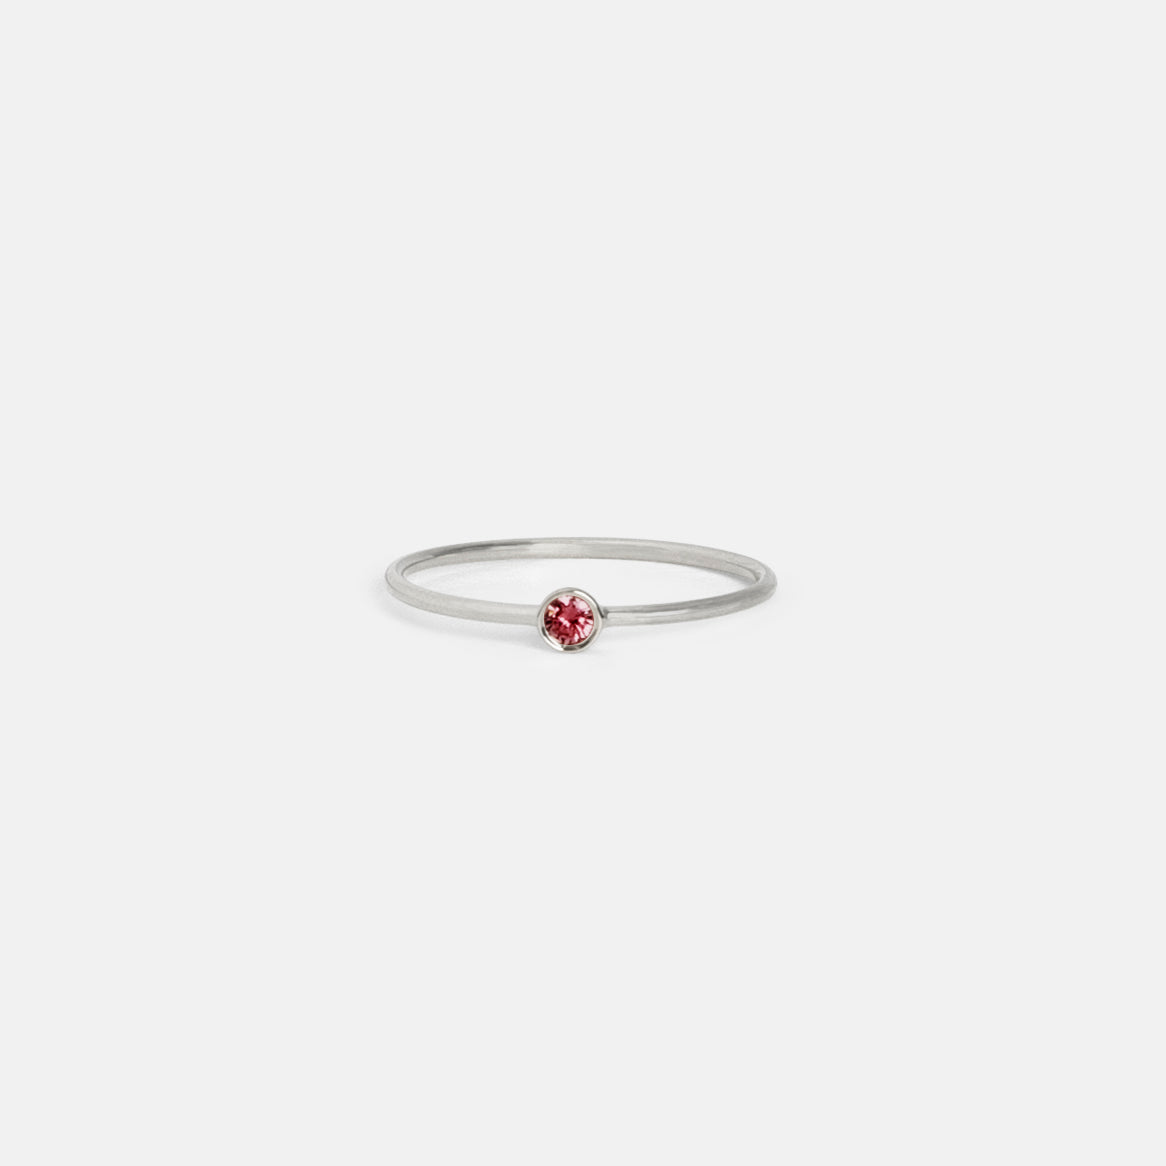 Cool Large Kaya Ring in 14k White Gold set with Ruby by SHW Fine Jewelry in NYC